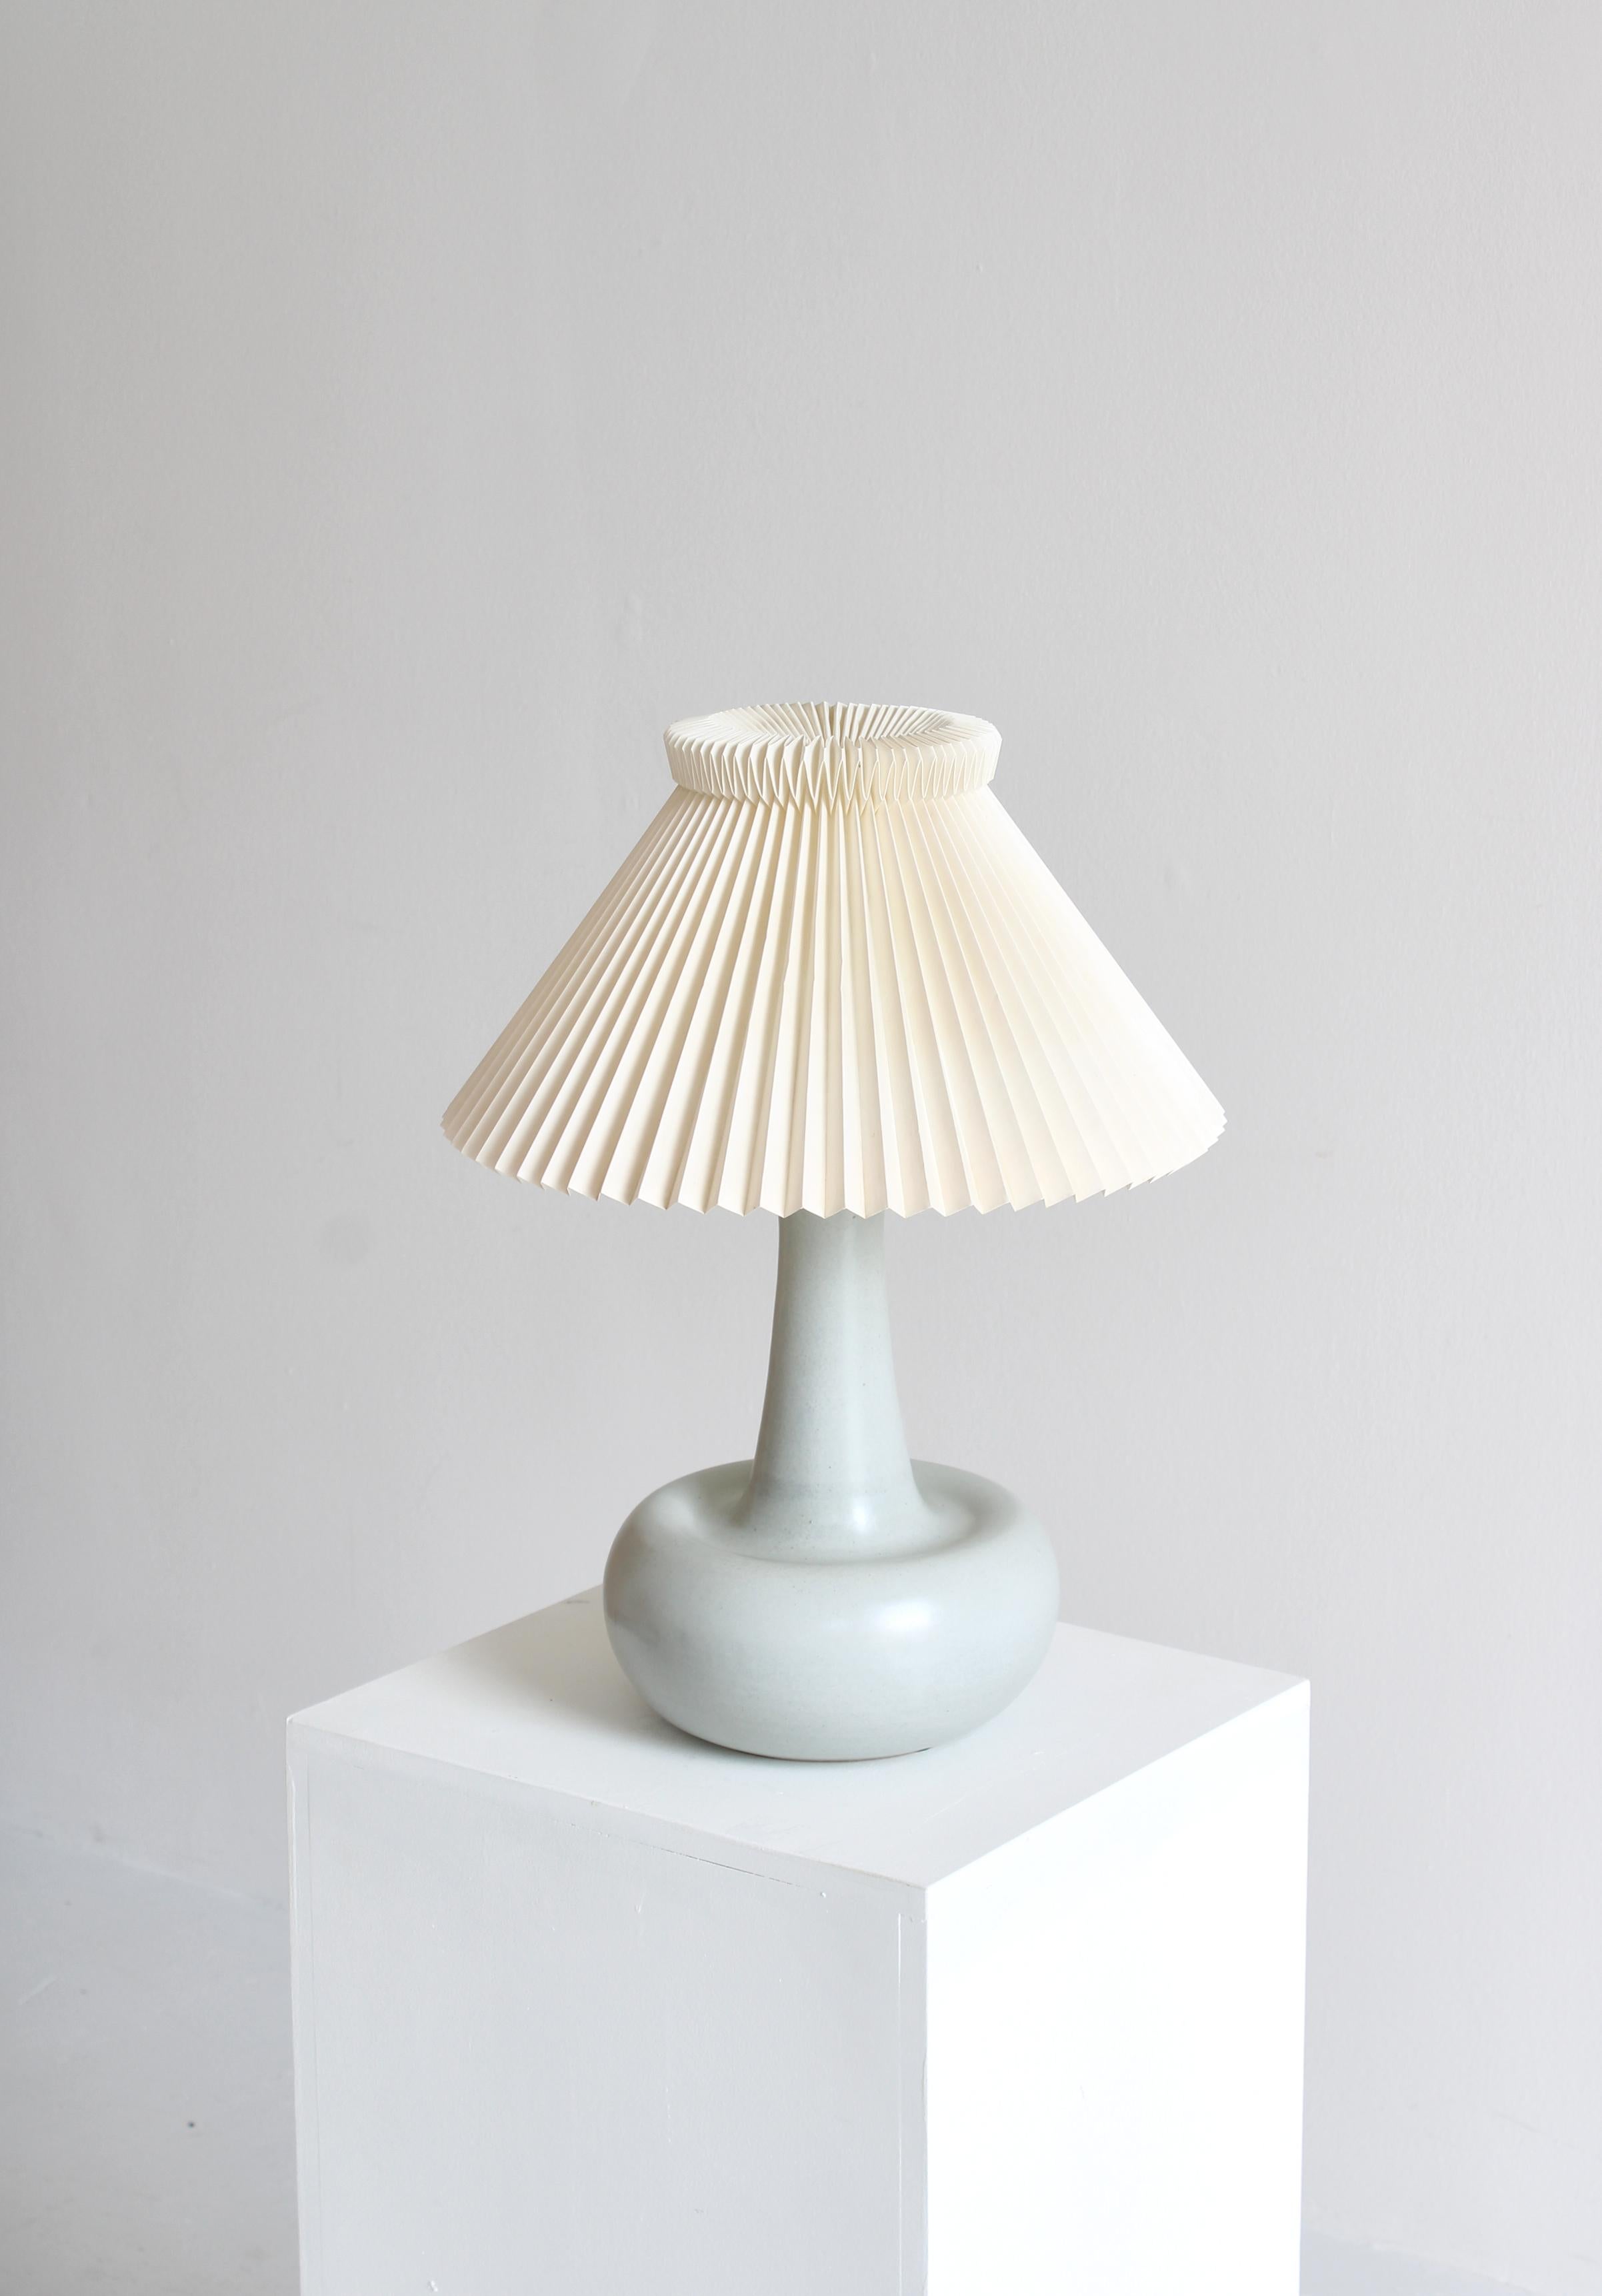 Le Klint Blue Table Lamp Stoneware Ole Bøgild Hand Folded Shade, Denmark, 1970s In Good Condition For Sale In Odense, DK